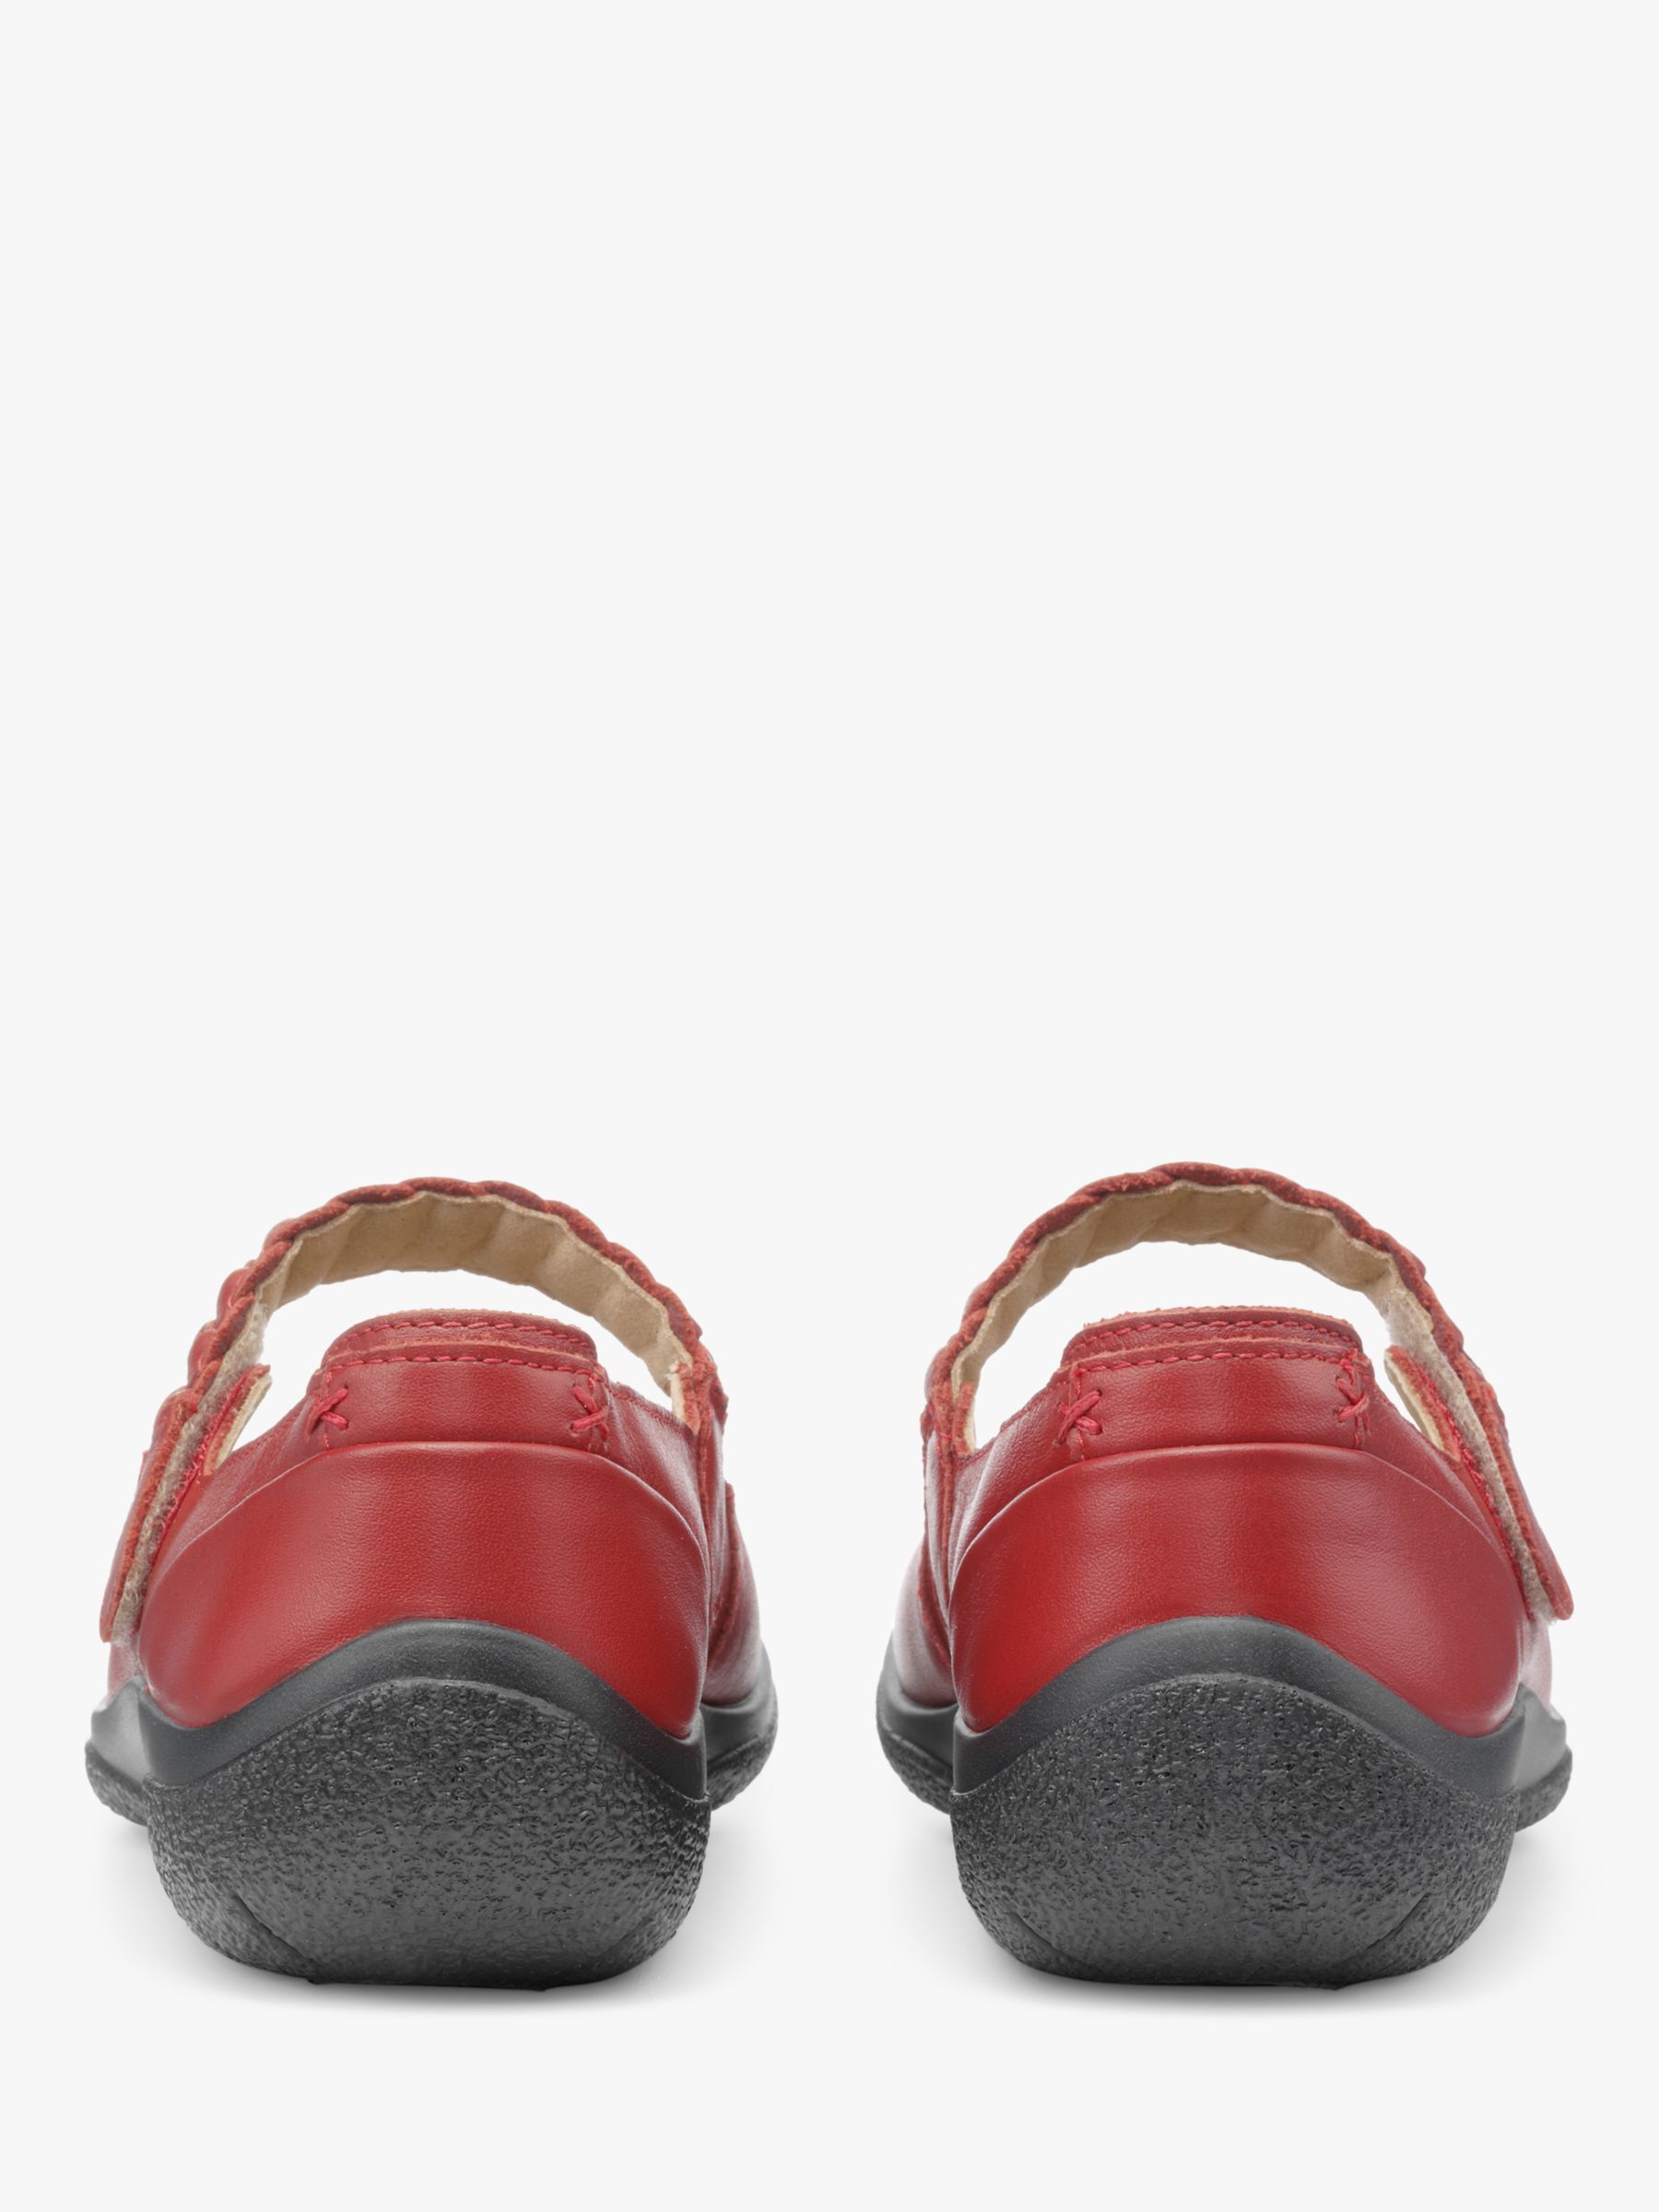 Hotter Shake Wide Fit Leather Mary Jane Shoes, Red at John Lewis & Partners